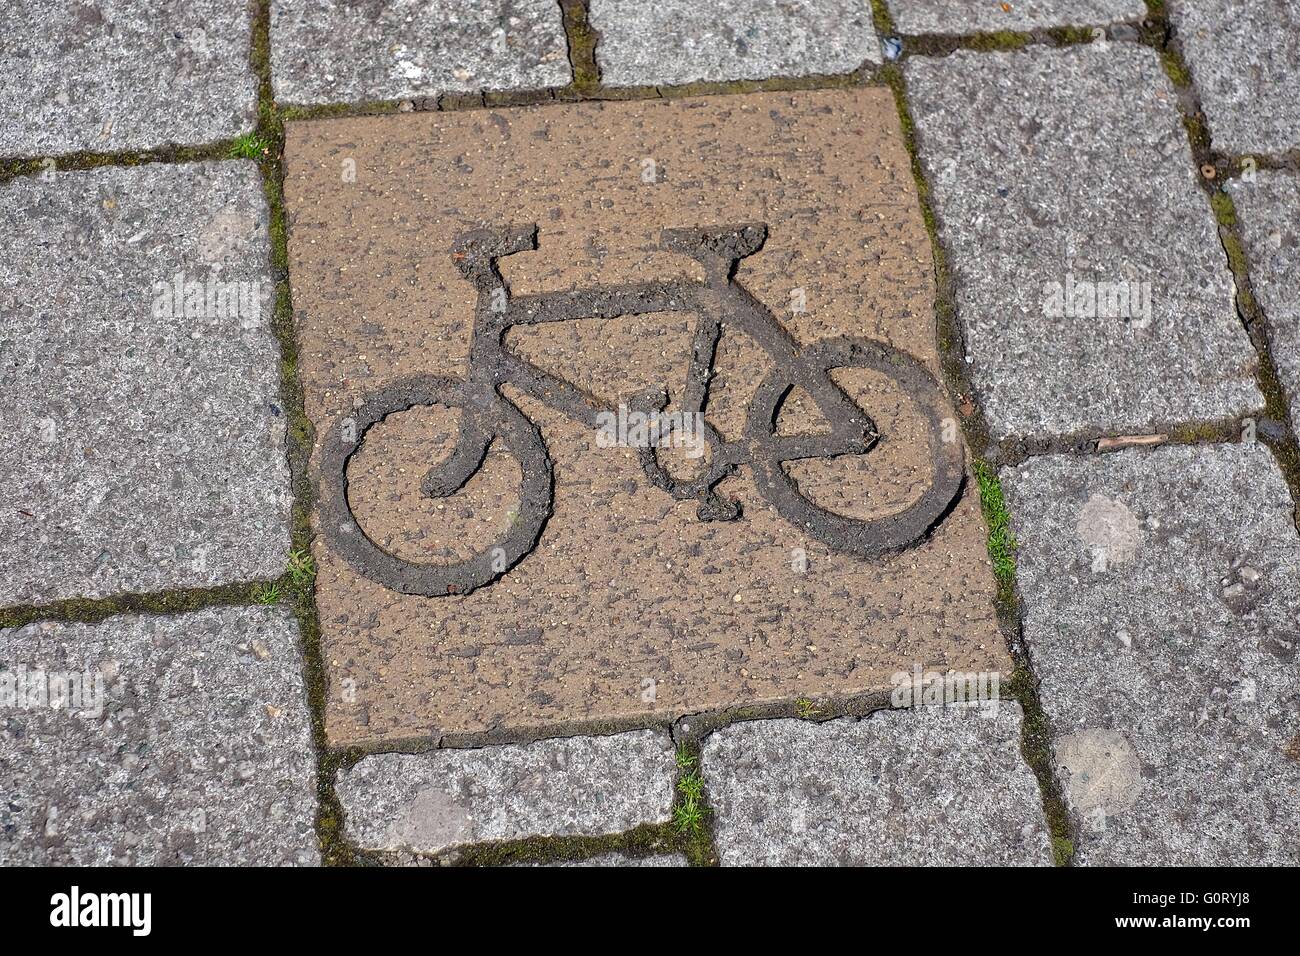 A cycle lane sign on a pavement in Bristol, UK Stock Photo